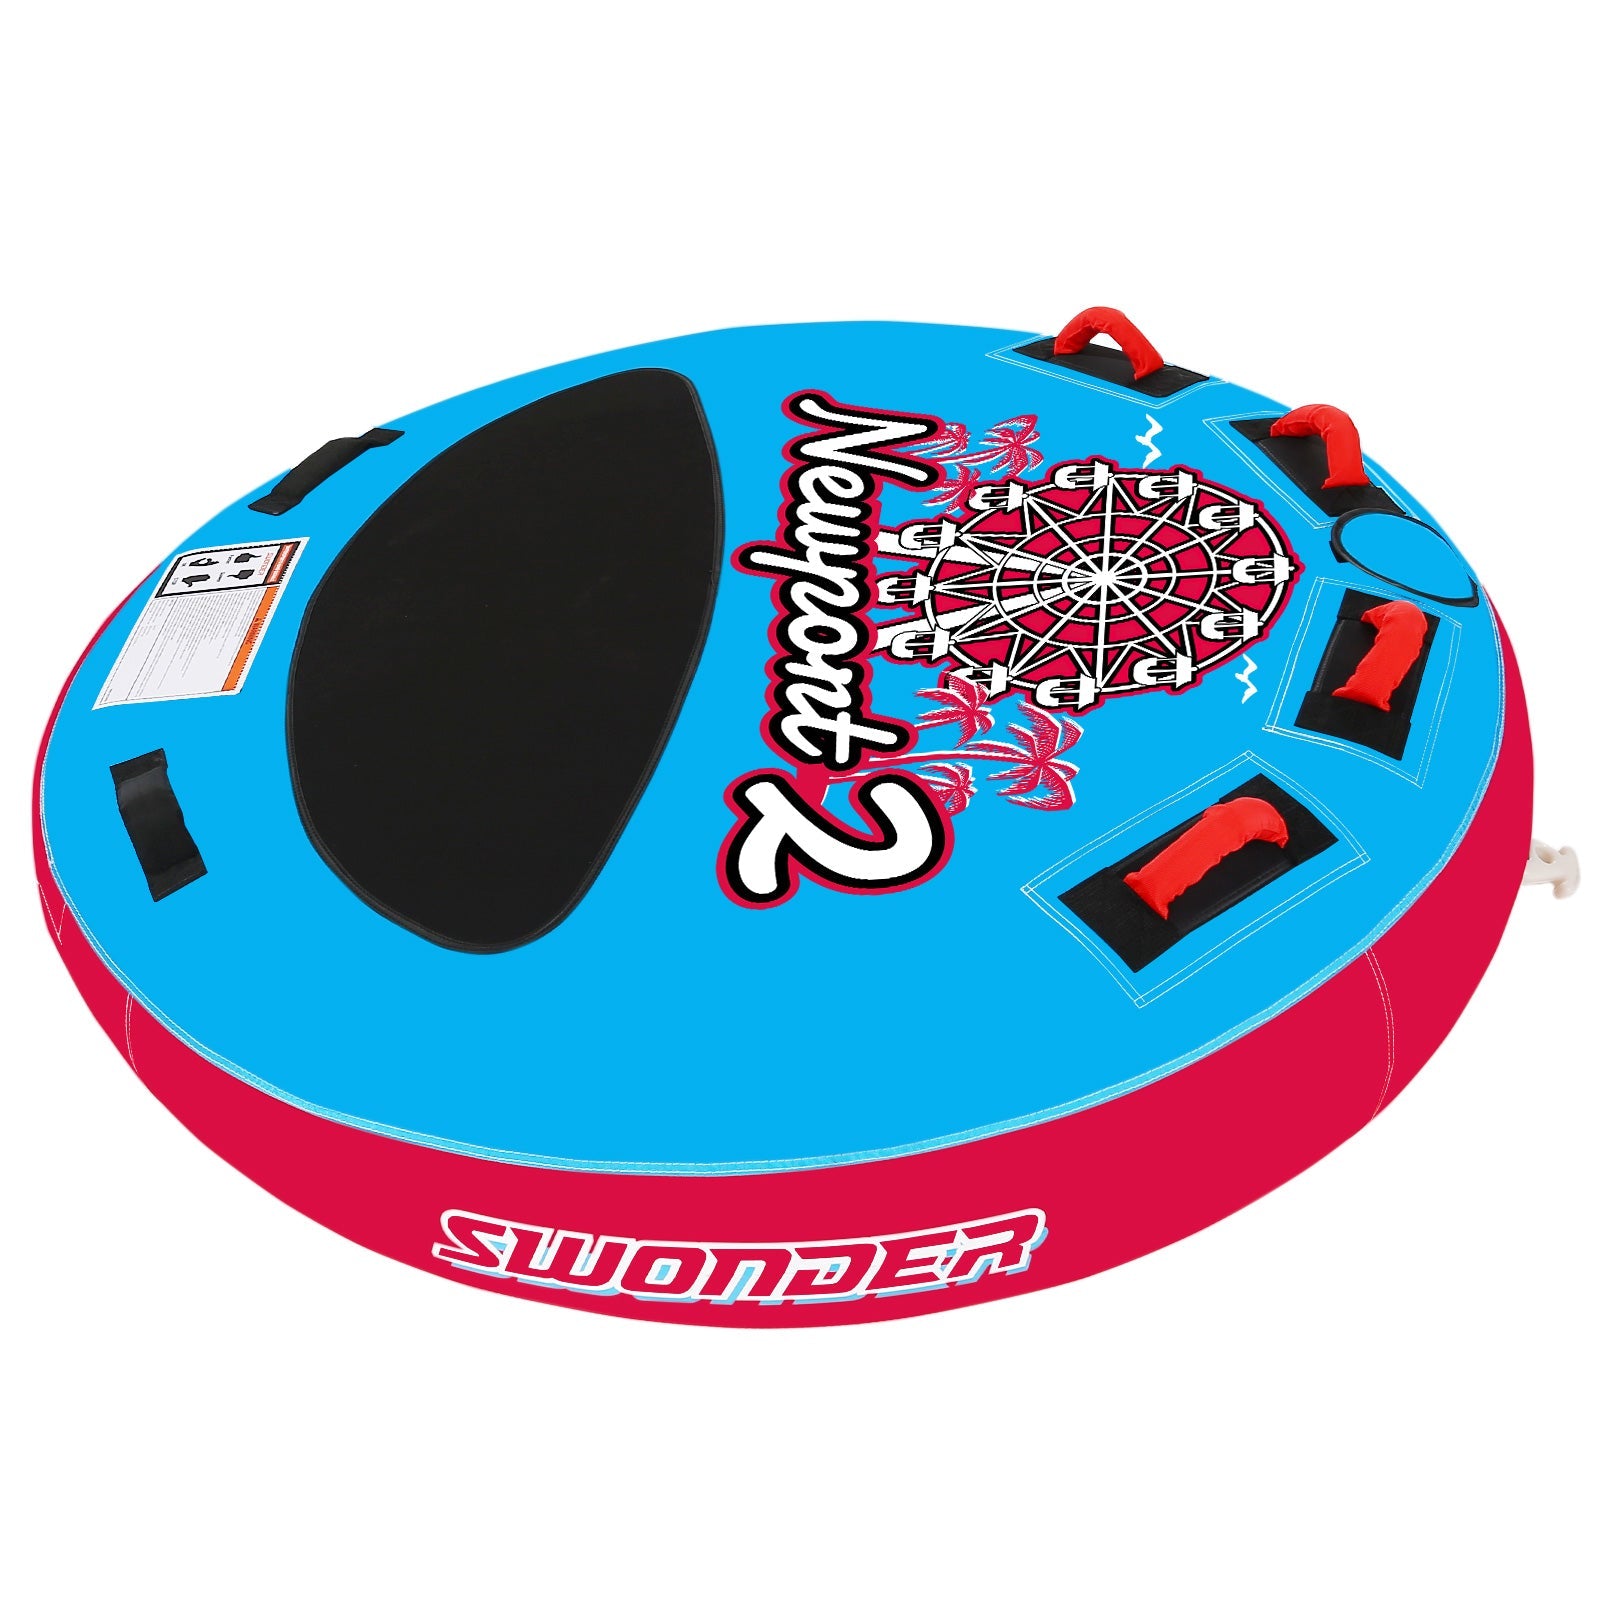 Swonder Newport2 Towable Tube for Boating, 1-2 Rider | A11N SPORTS